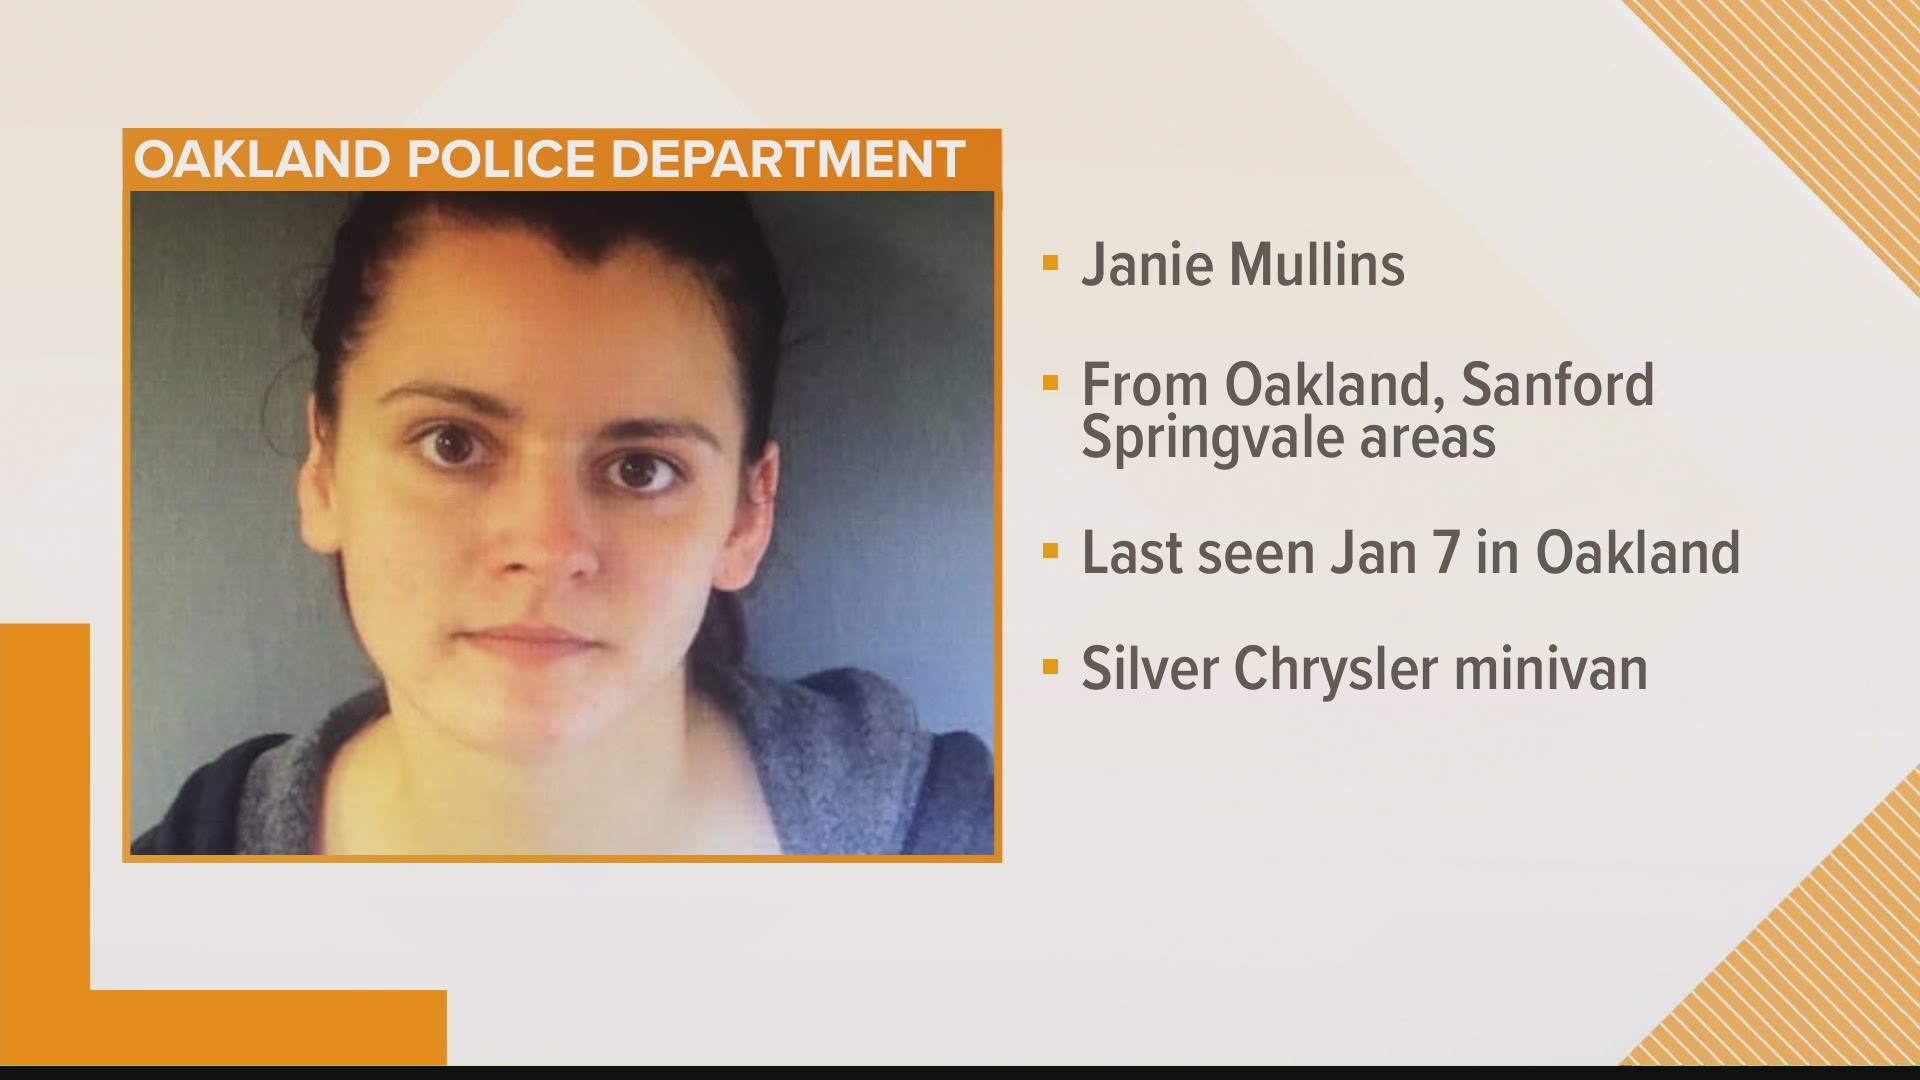 Police in Oakland are asking for help finding a woman who has been missing for a week